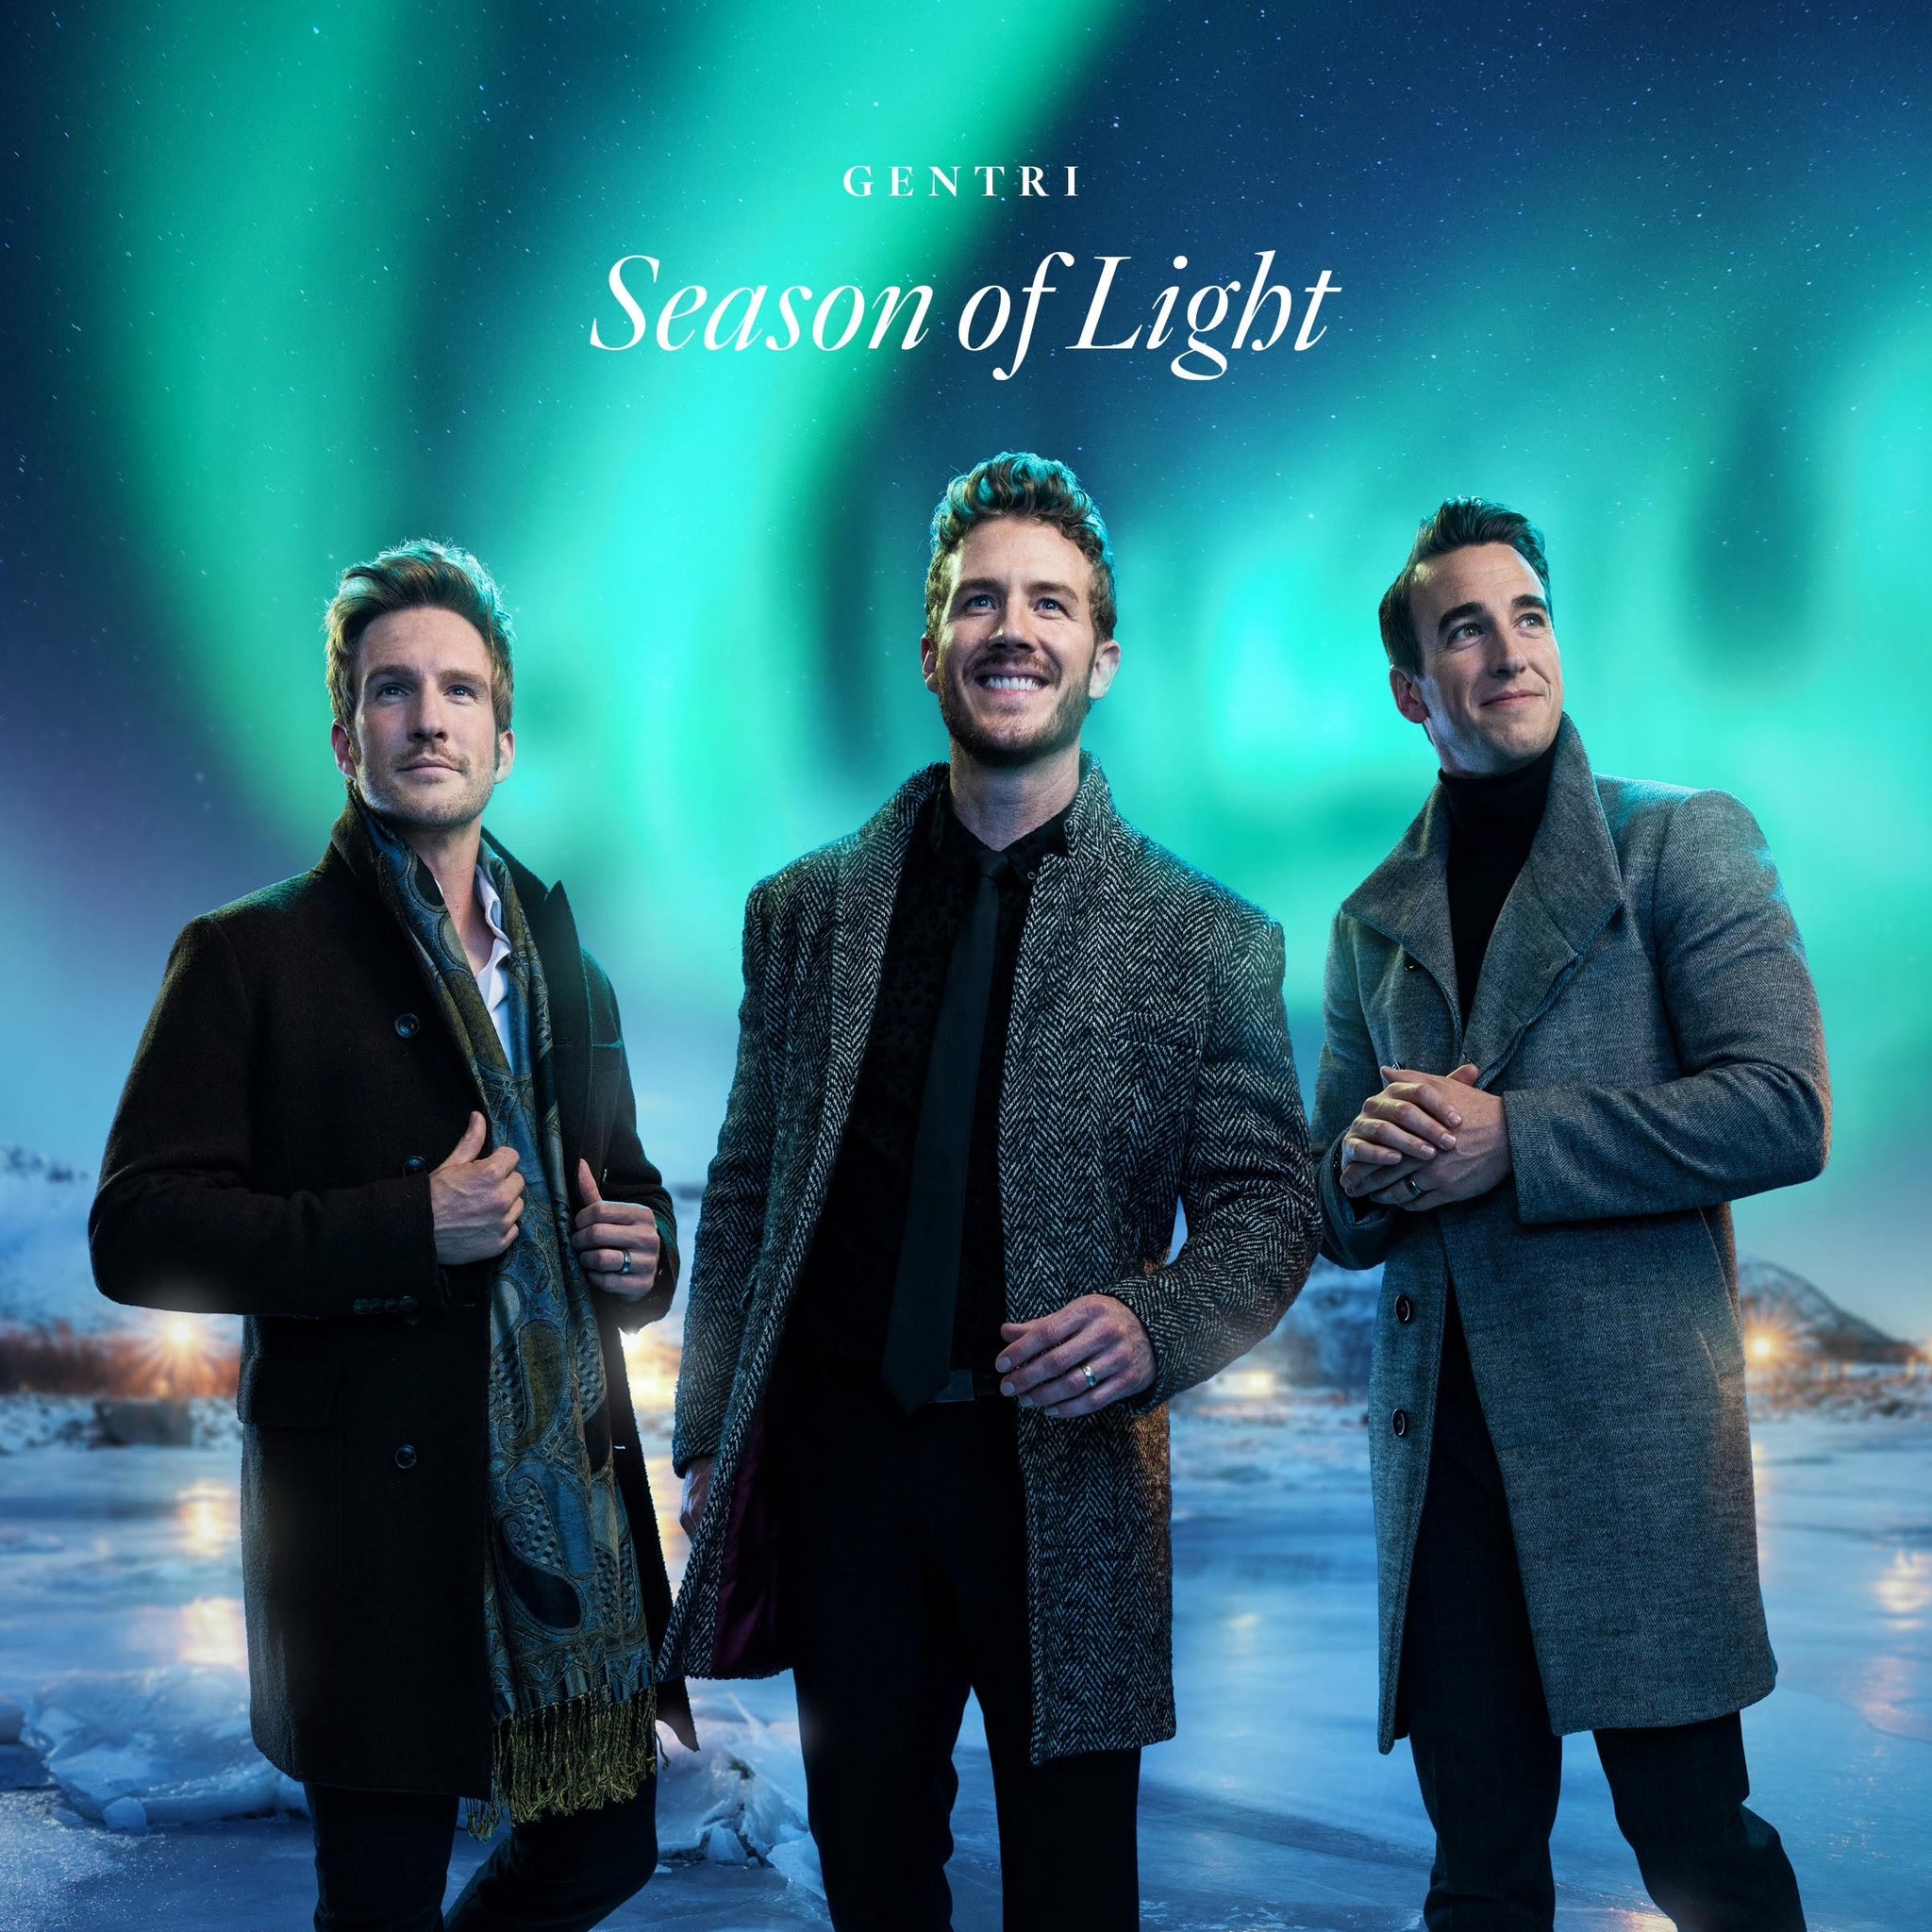 Autographed Season Of Light Physical CD - Limited Edition